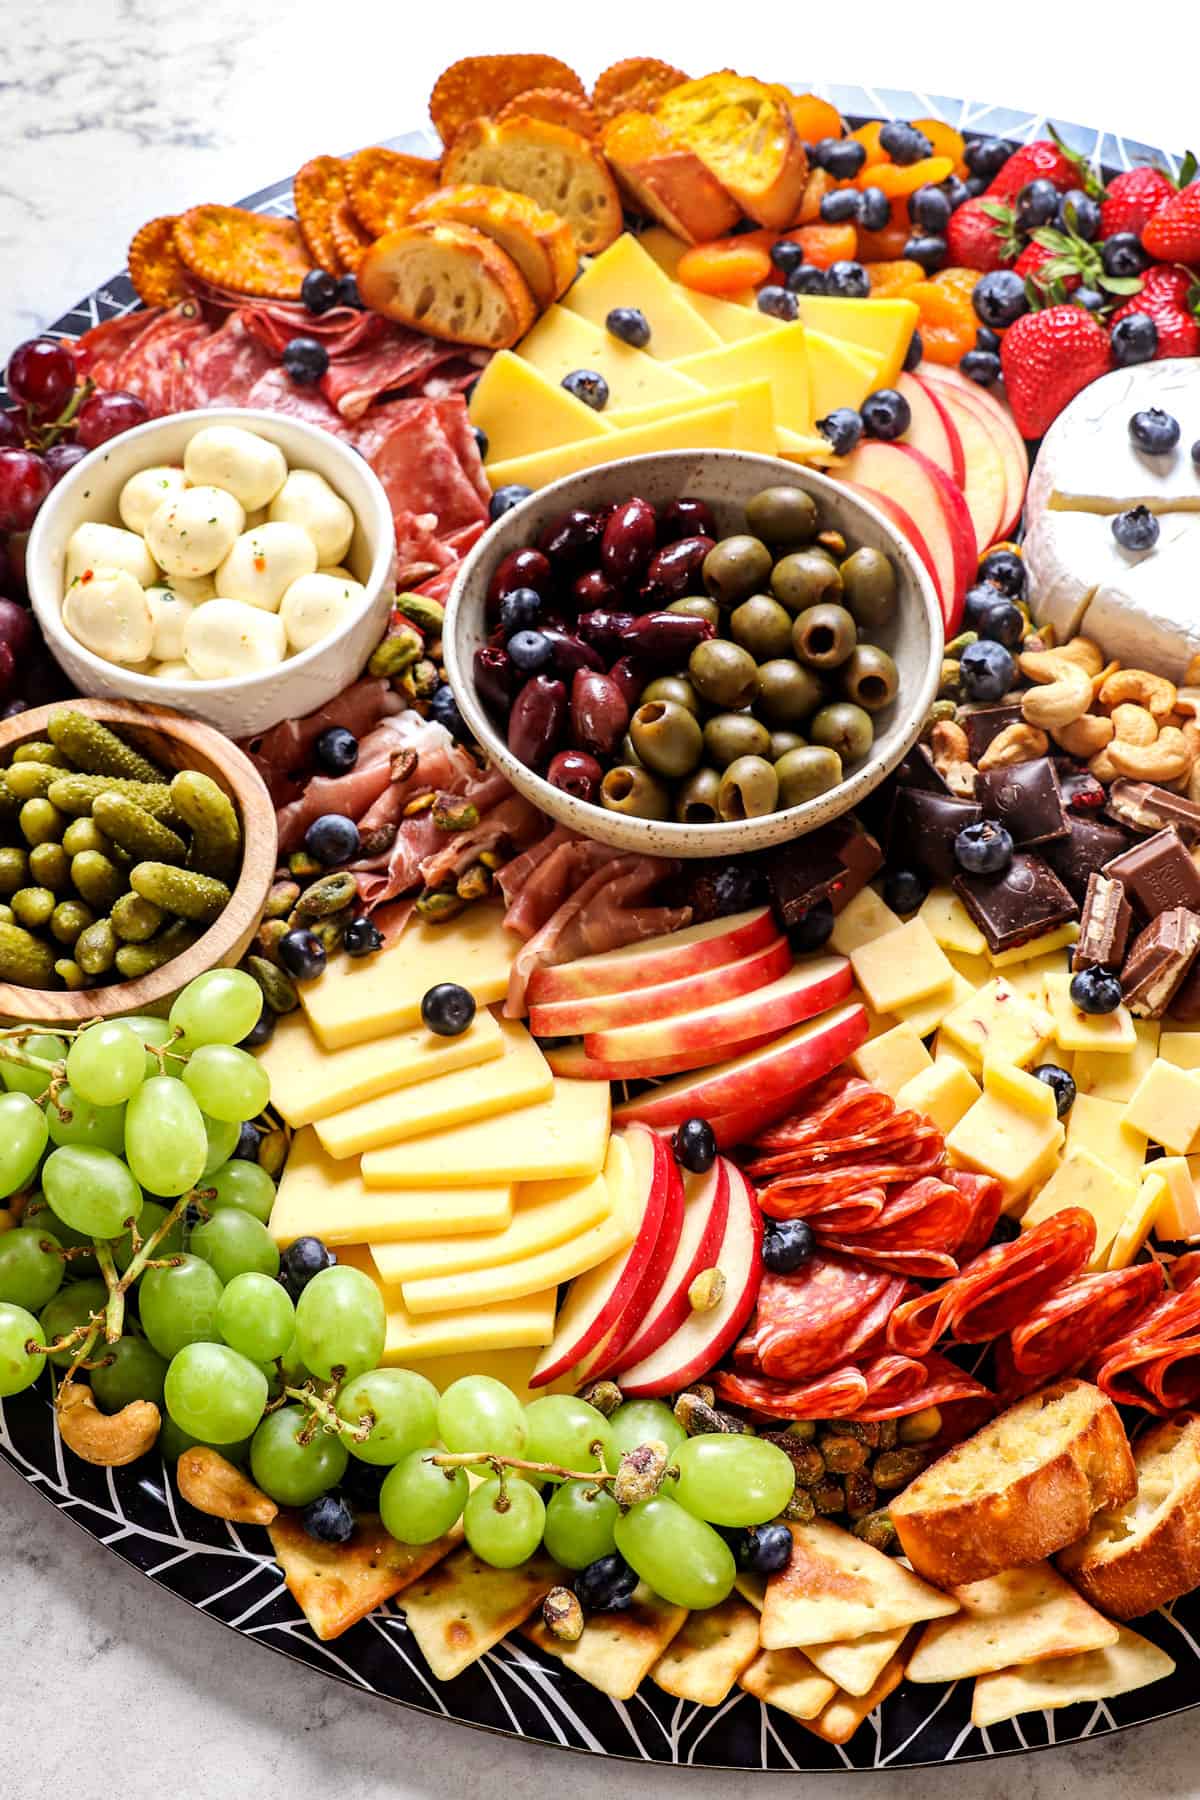 up close of a simple charcuterie board with cheeses, apples, grapes, meats and cheeses